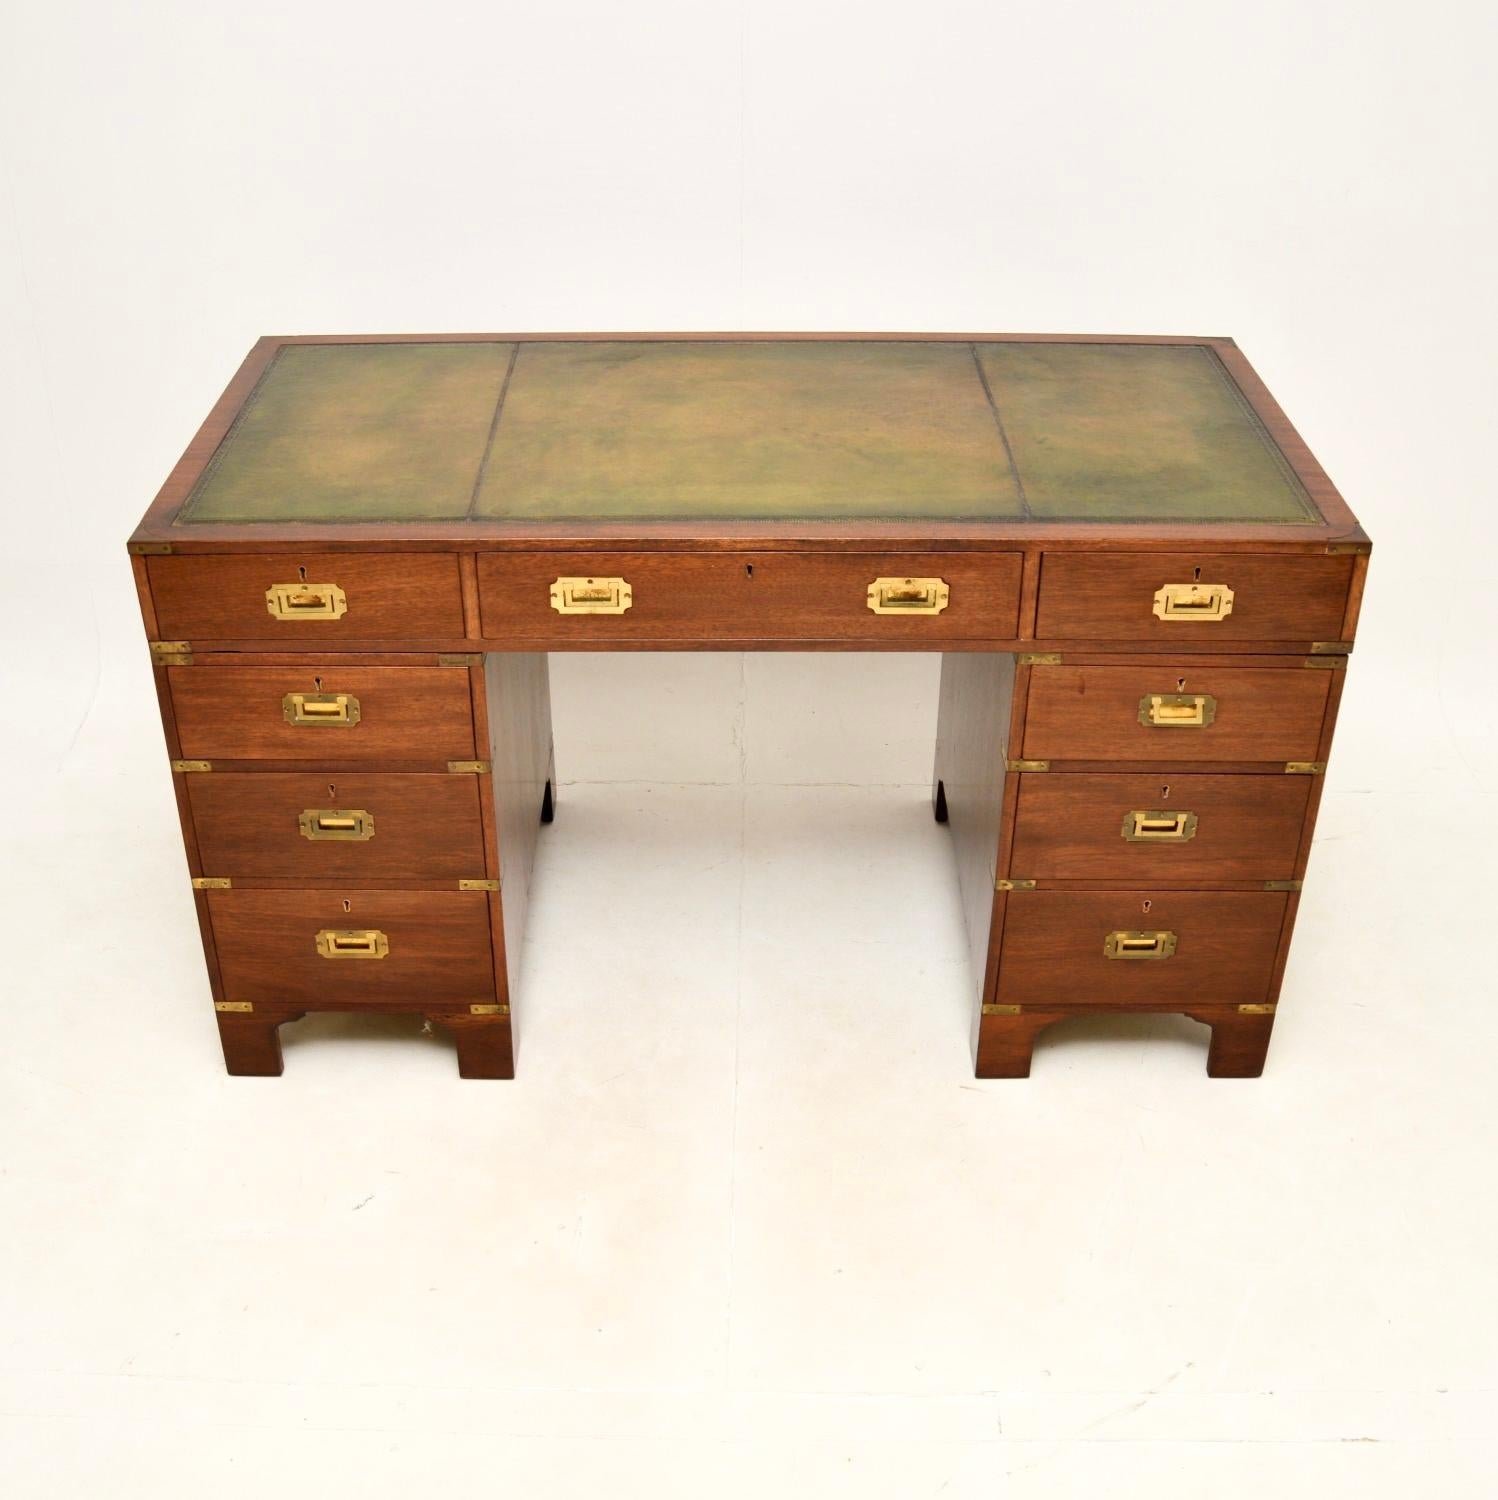 A top quality antique military campaign style desk. This was made in England, it dates from around the 1930’s.

It is very well made, with a useful and smart design. The wood has a lovely colour tone, there is high quality brass hardware throughout,